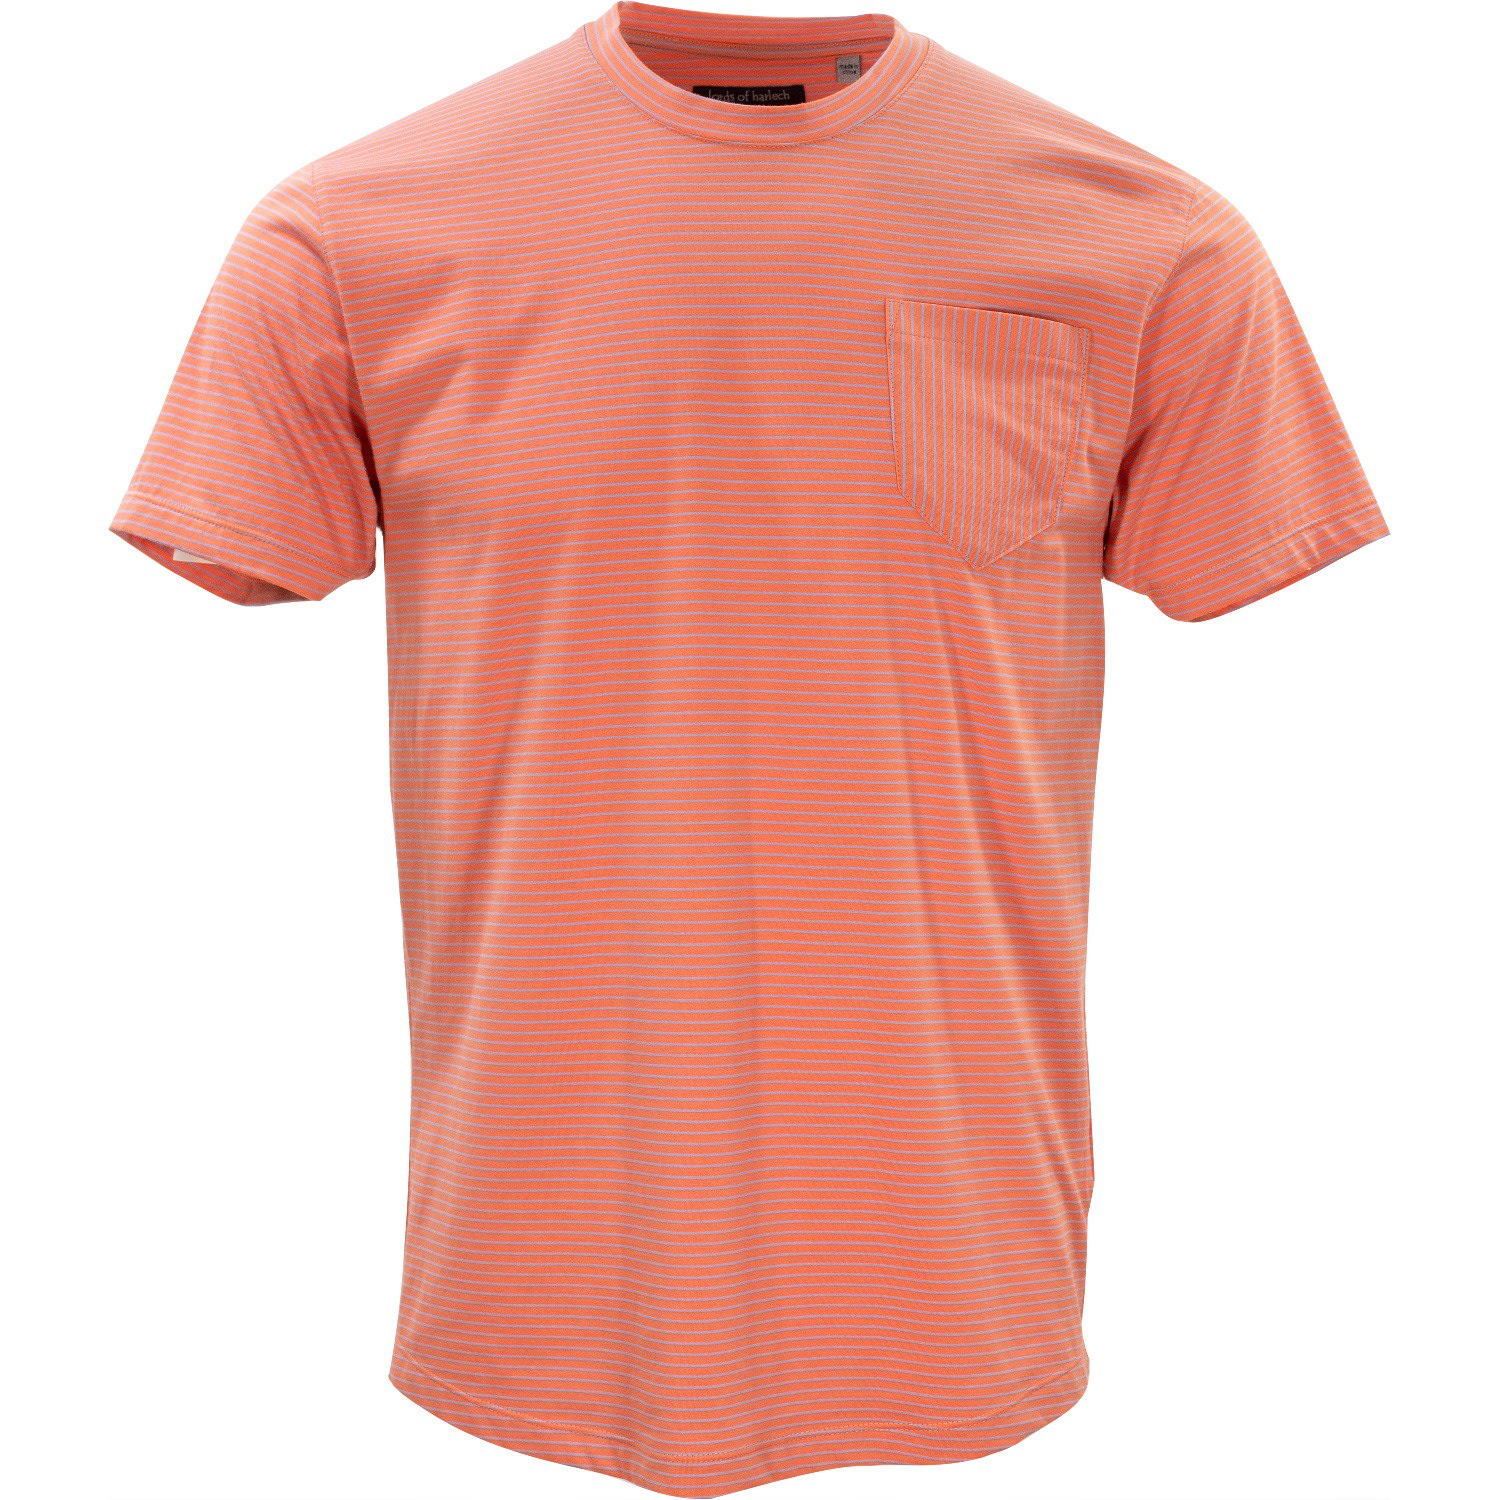 Men’s Yellow / Orange Tate Crew - Coral & Blue Stripe Small Lords of Harlech